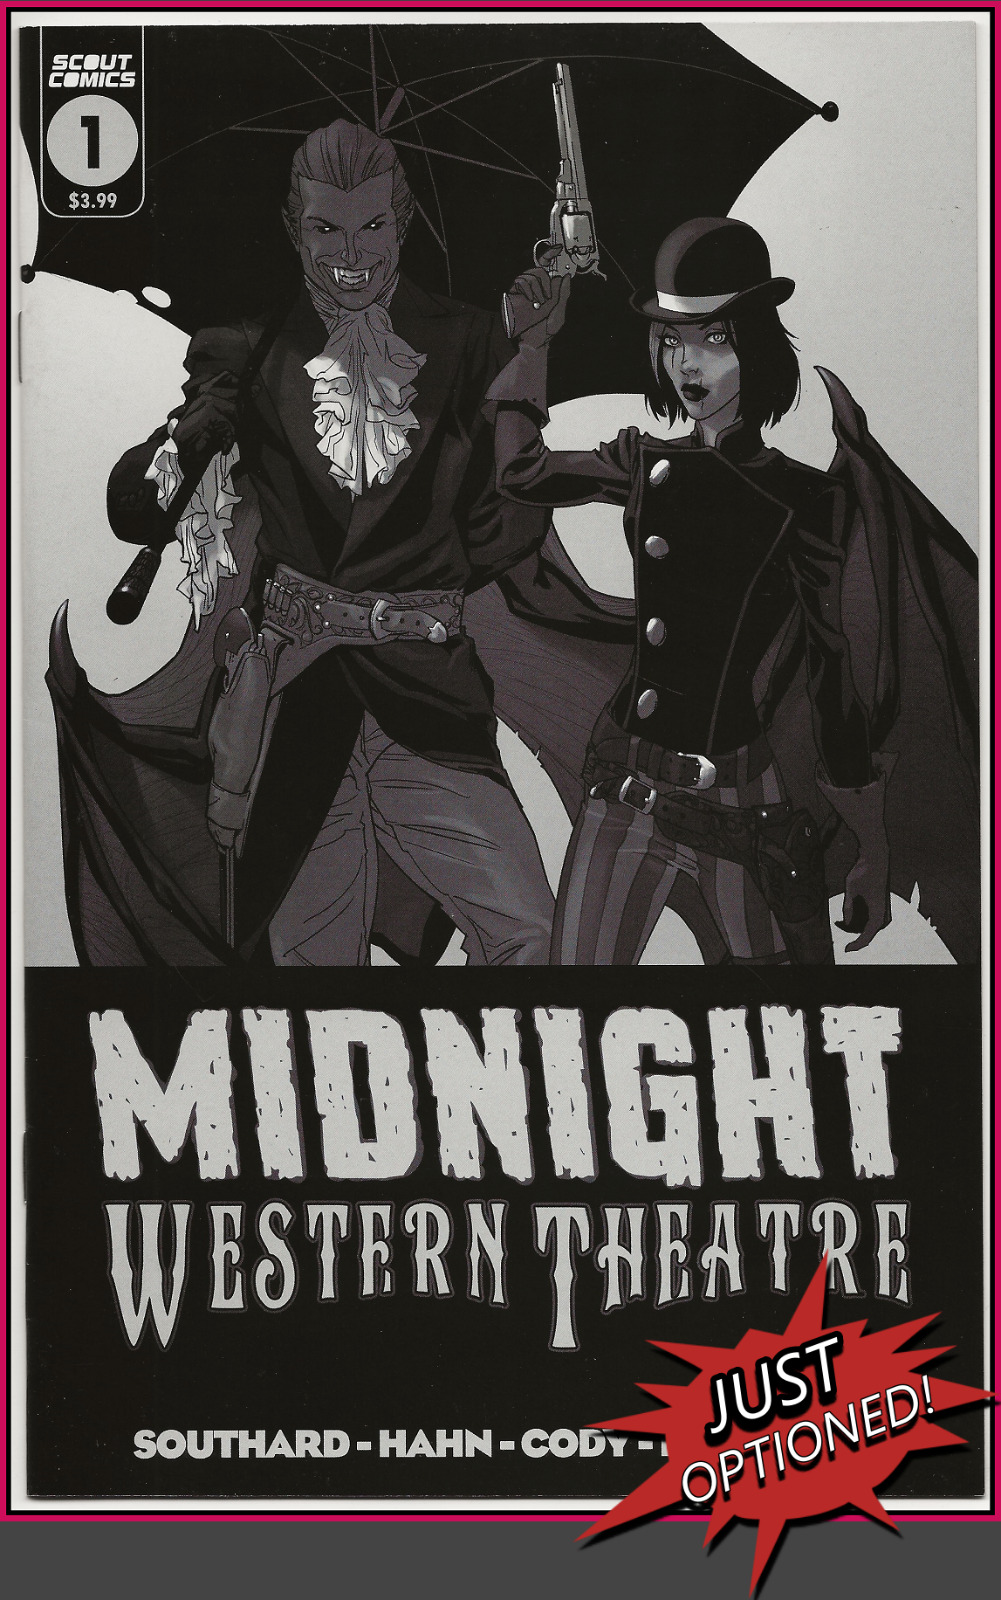 MIDNIGHT WESTERN THEATRE #1 (2021) NM 1ST PRINT JUST OPTIONED SCOUT COMICS HOT